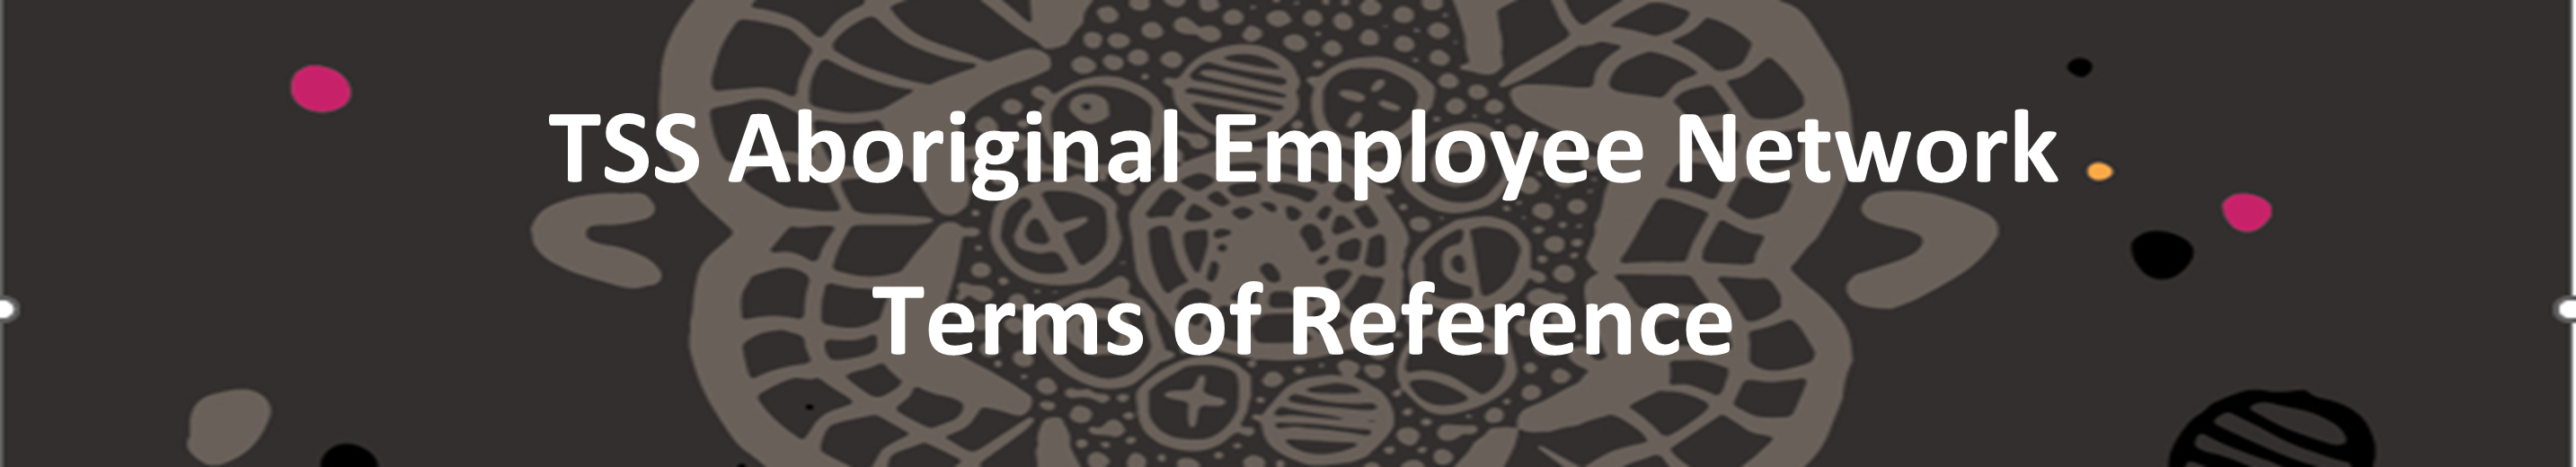 TSS Aborginal Employee Network Terms of Reference